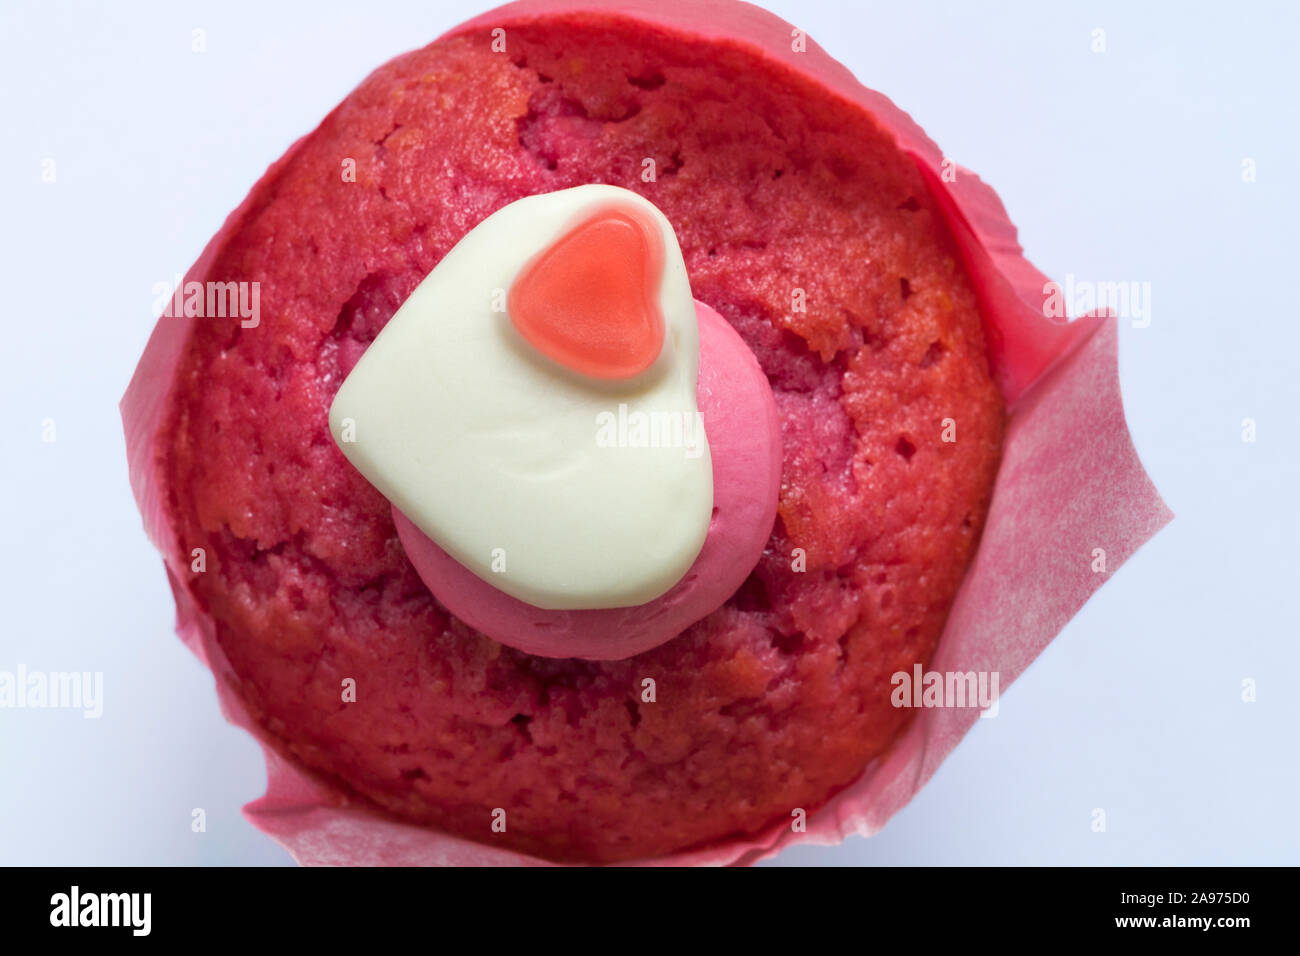 Percy Pig heart sweet muffin fresh from M&S in-store bakery set on white background Stock Photo